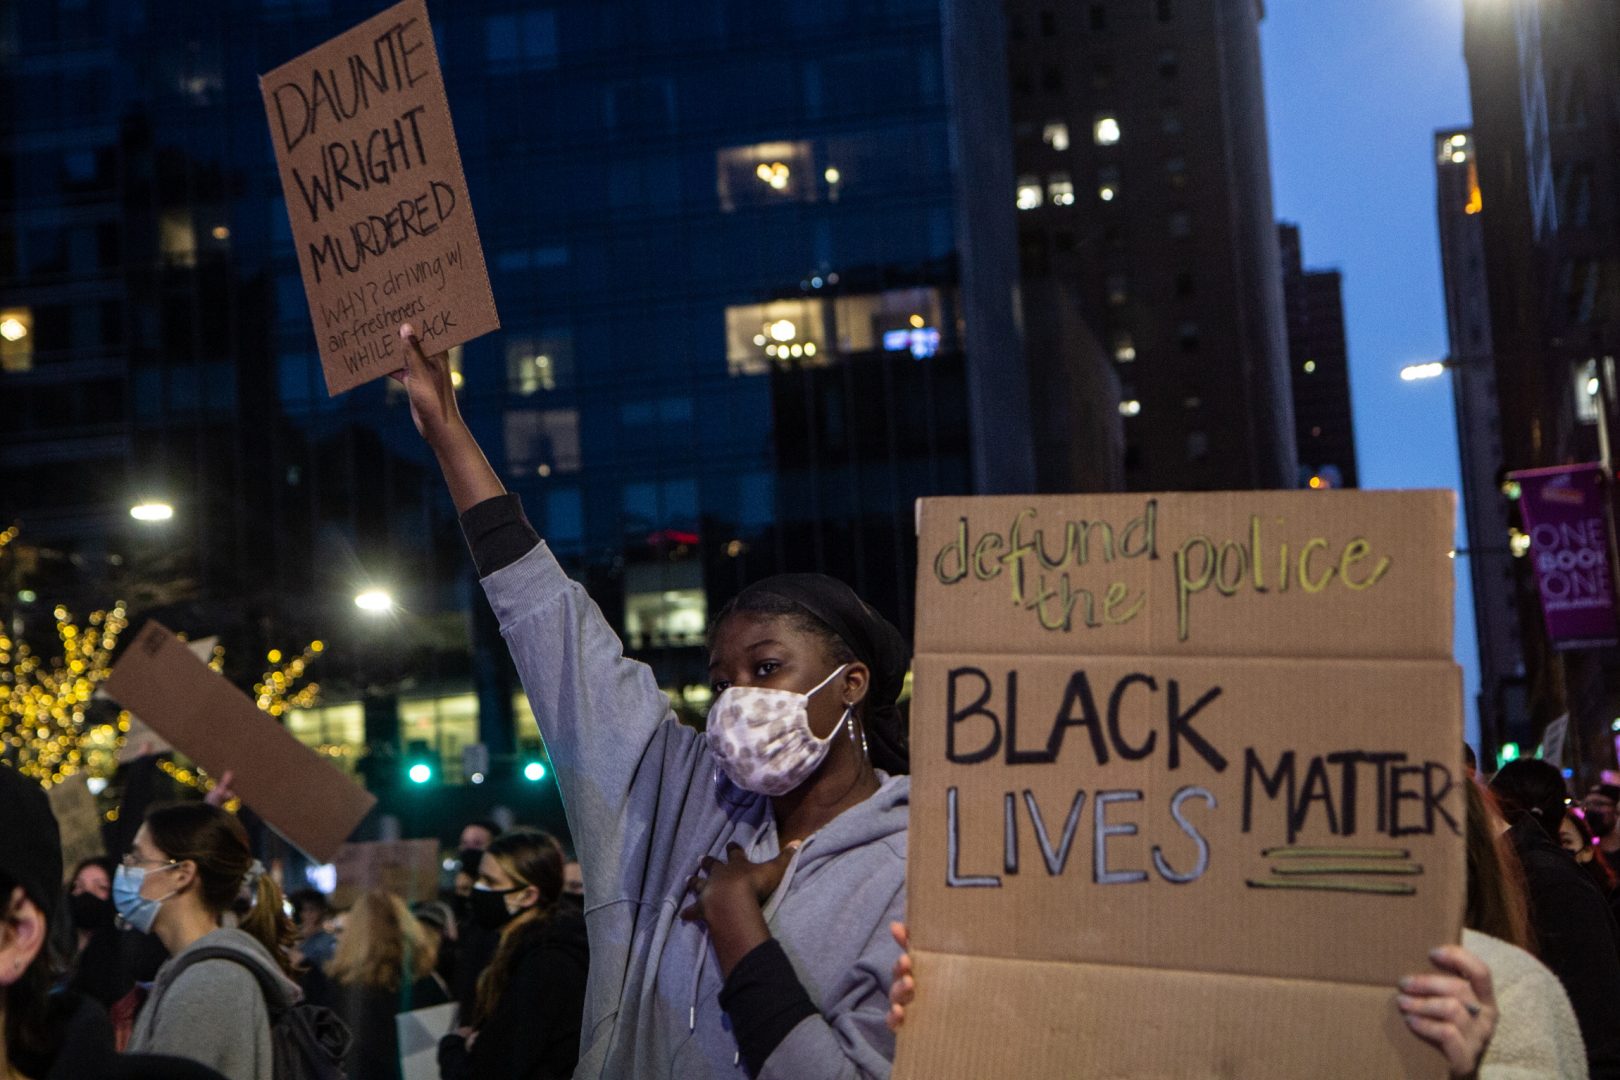 Protesters demanding justice for Duane Wright, a Black man killed by police outside Minneapolis, and other Black people who lost lives to police, marched through Center City, Philadelphia Tuesday night. 